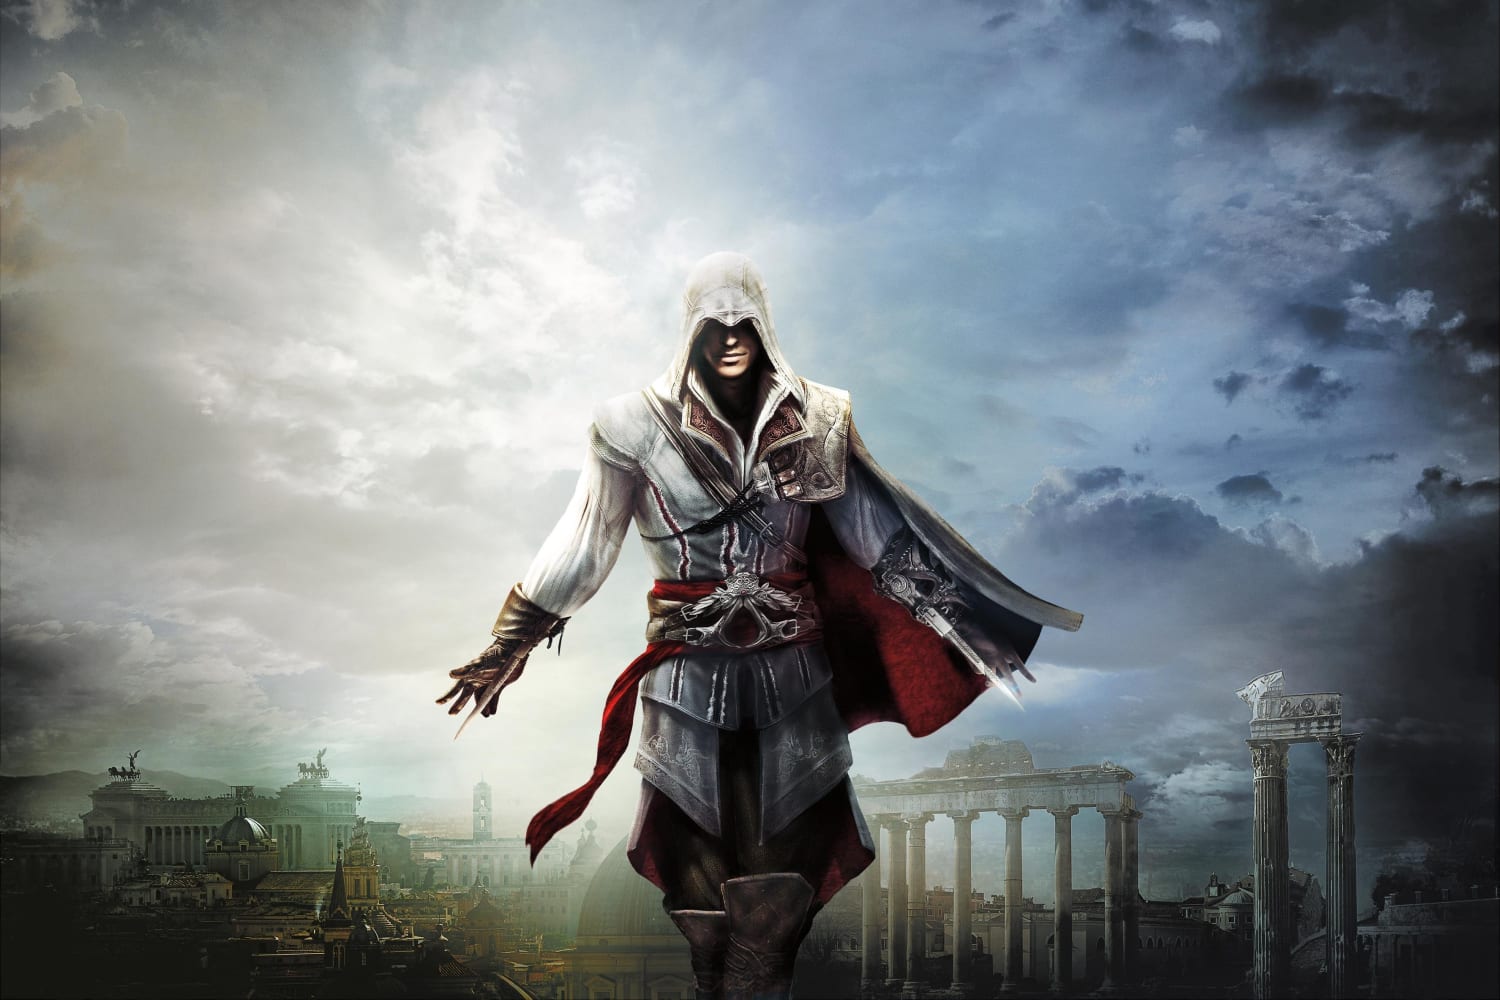 Assassin's Creed: 10 facts that will blow your mind